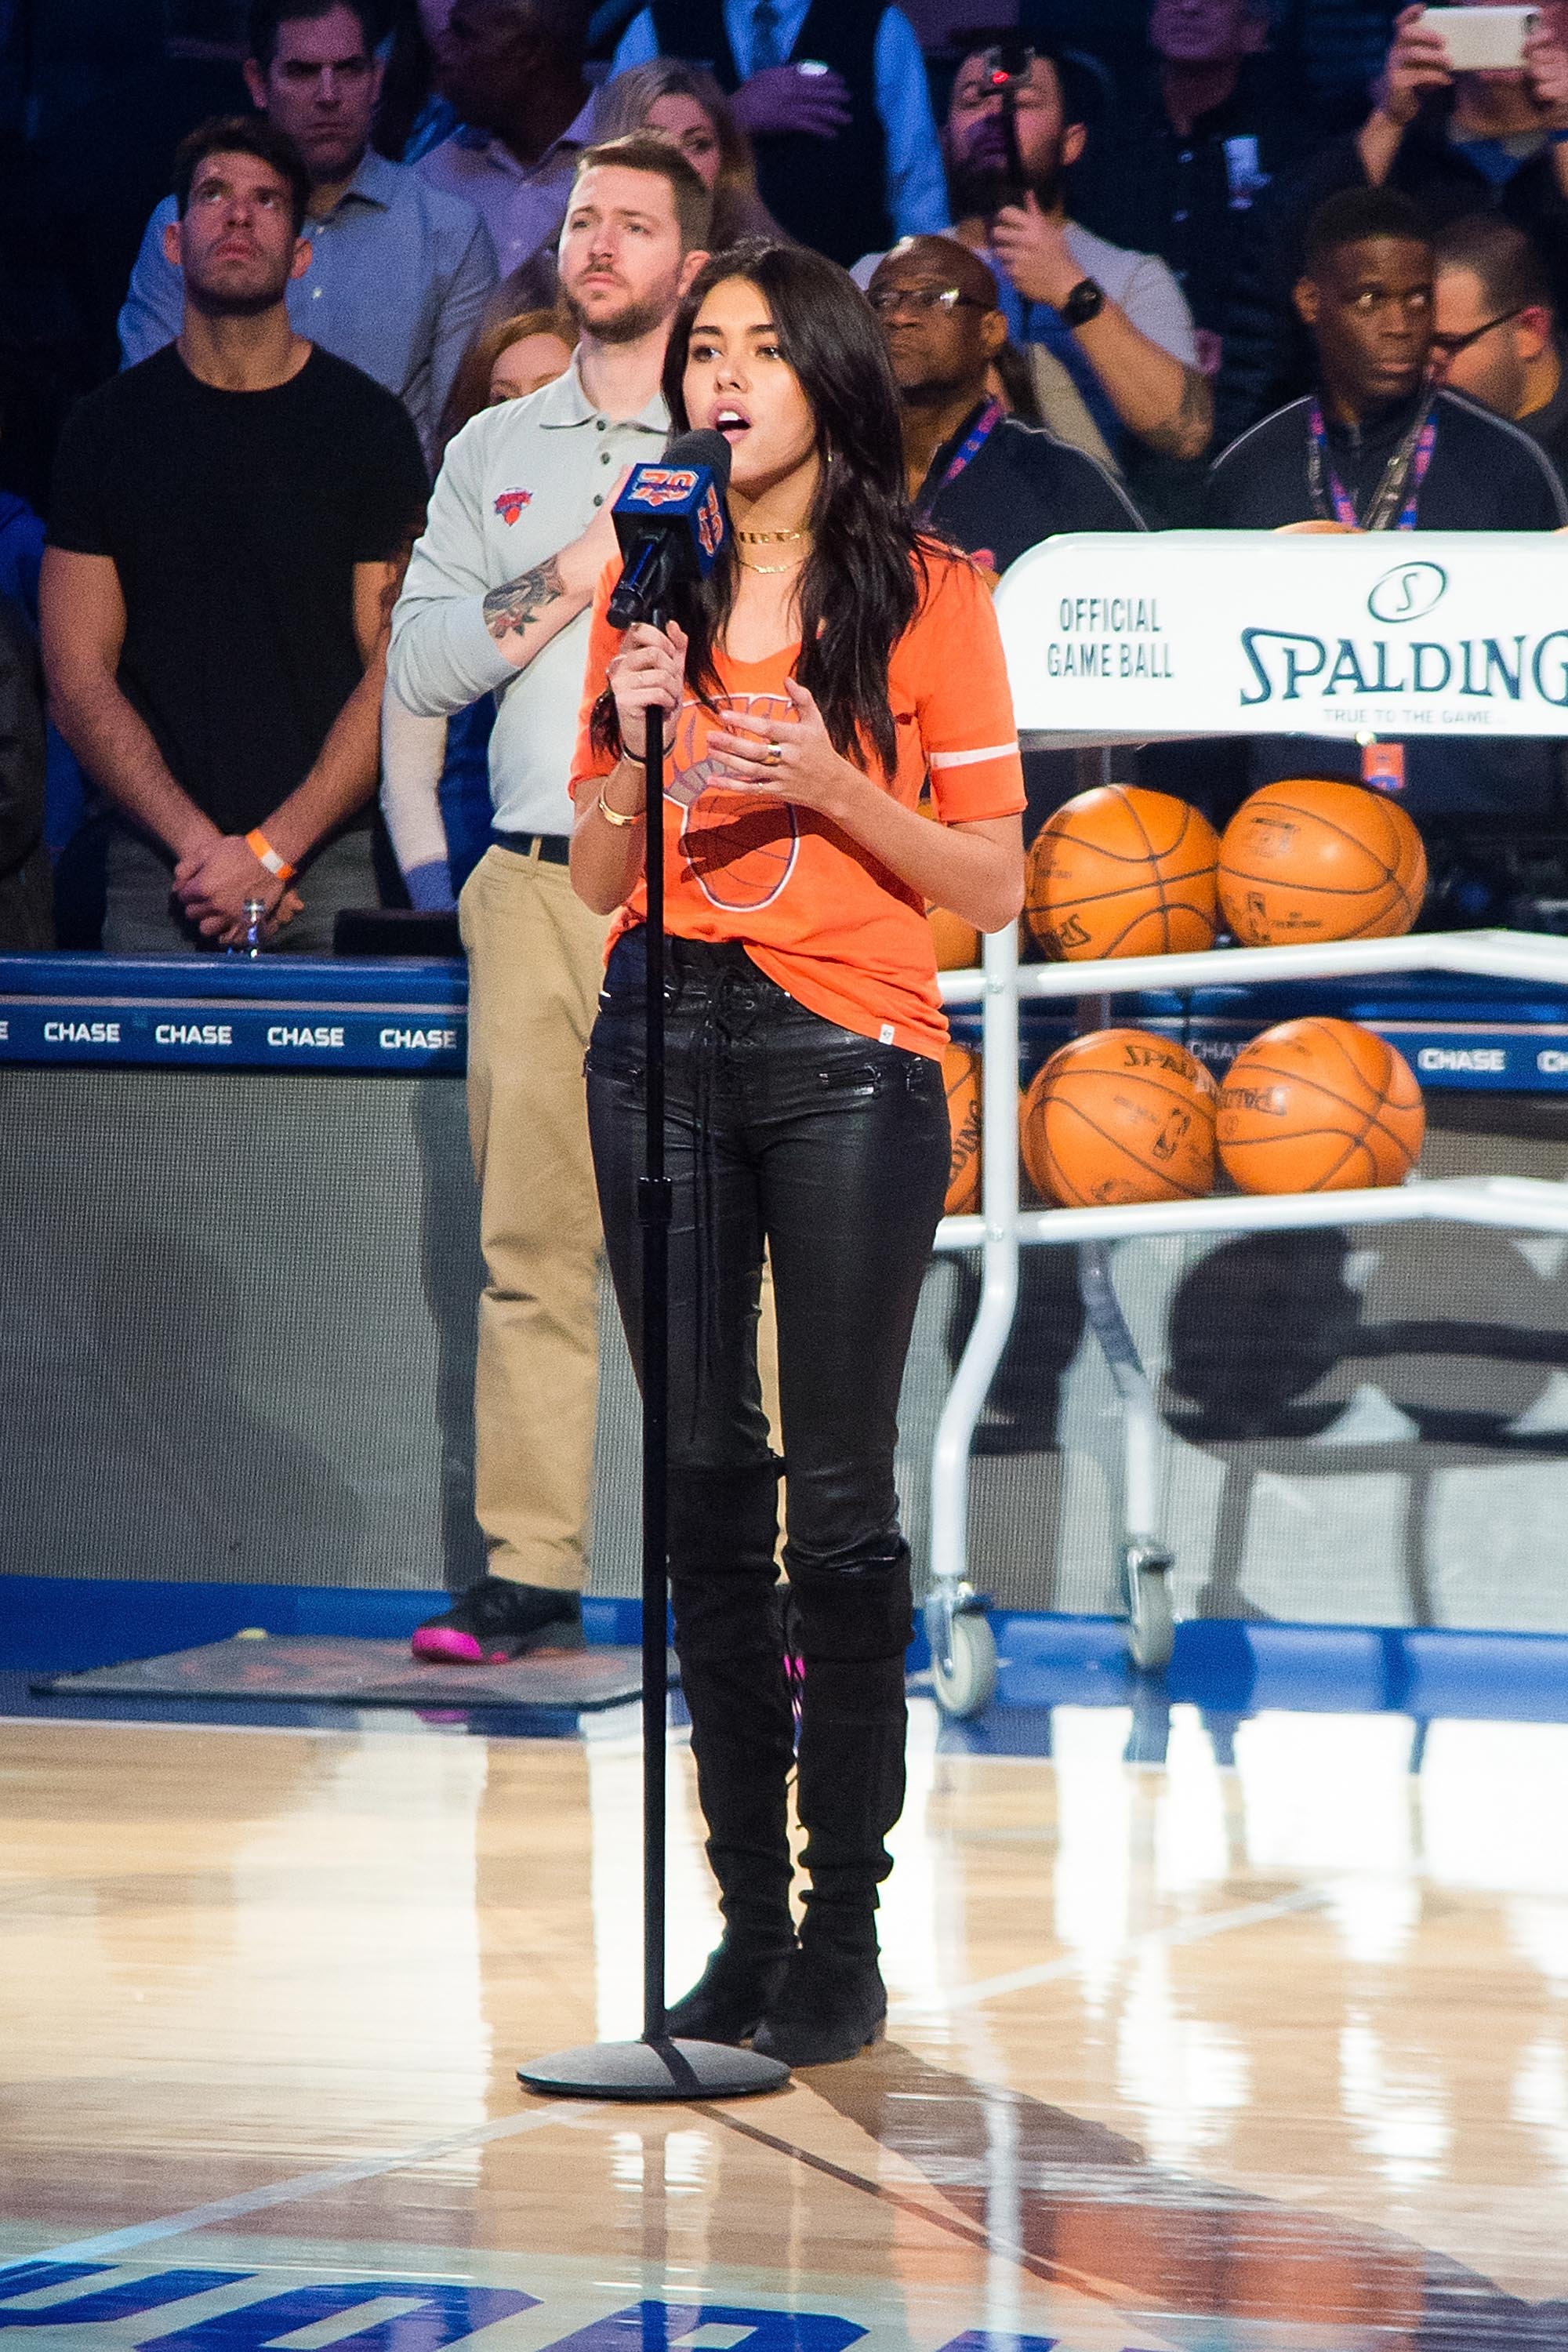 Madison Beer sings the United States National Anthem